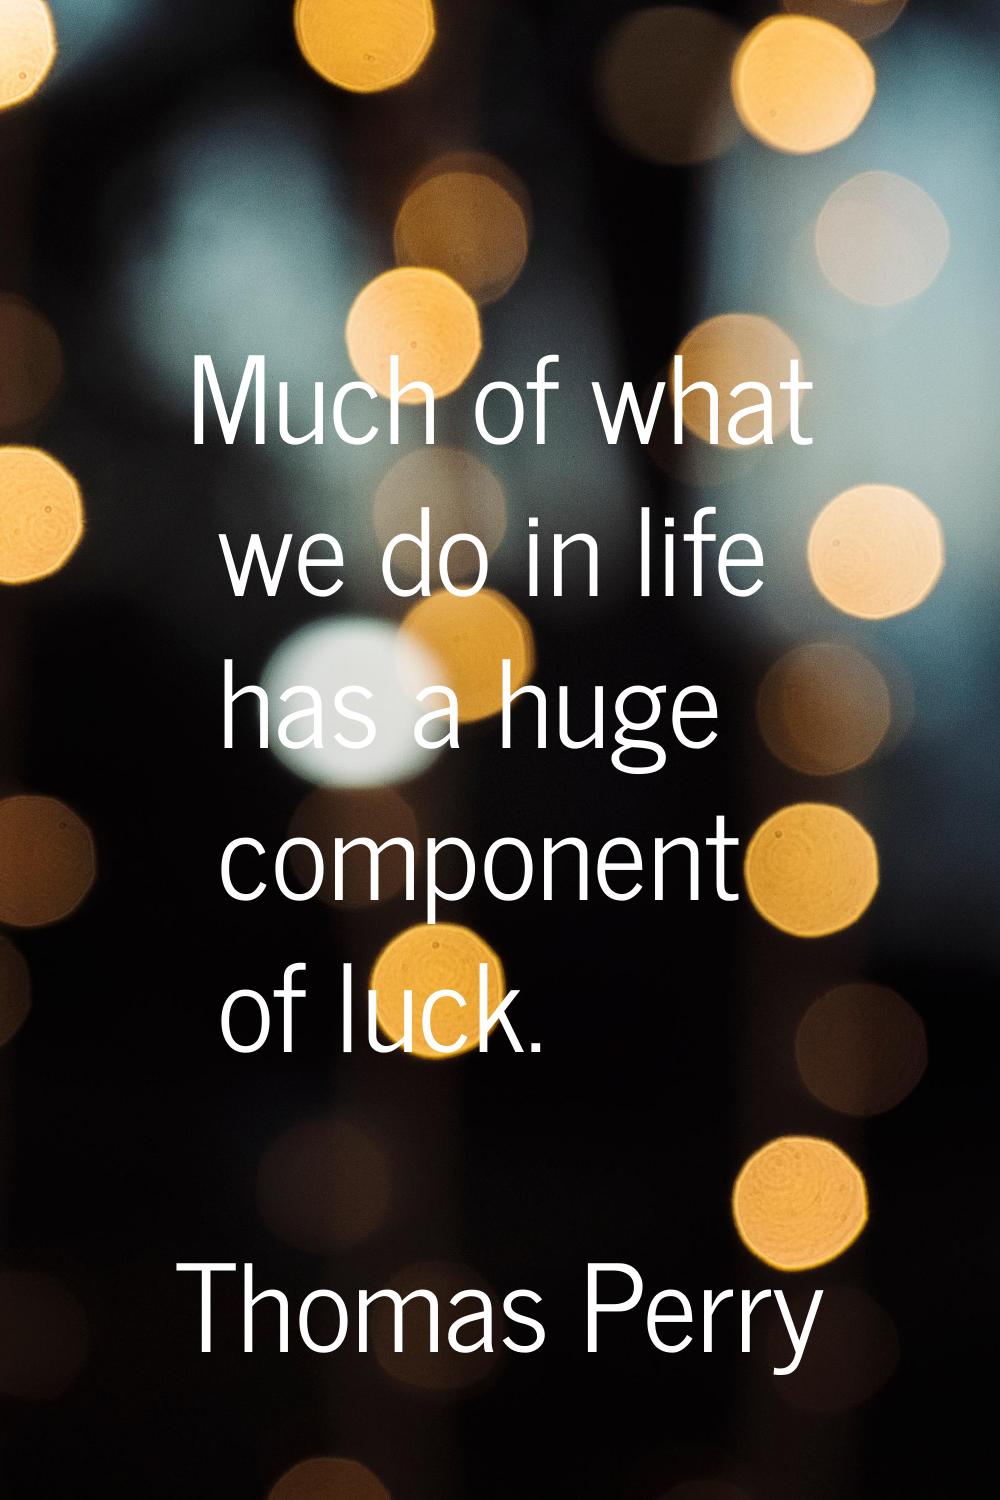 Much of what we do in life has a huge component of luck.